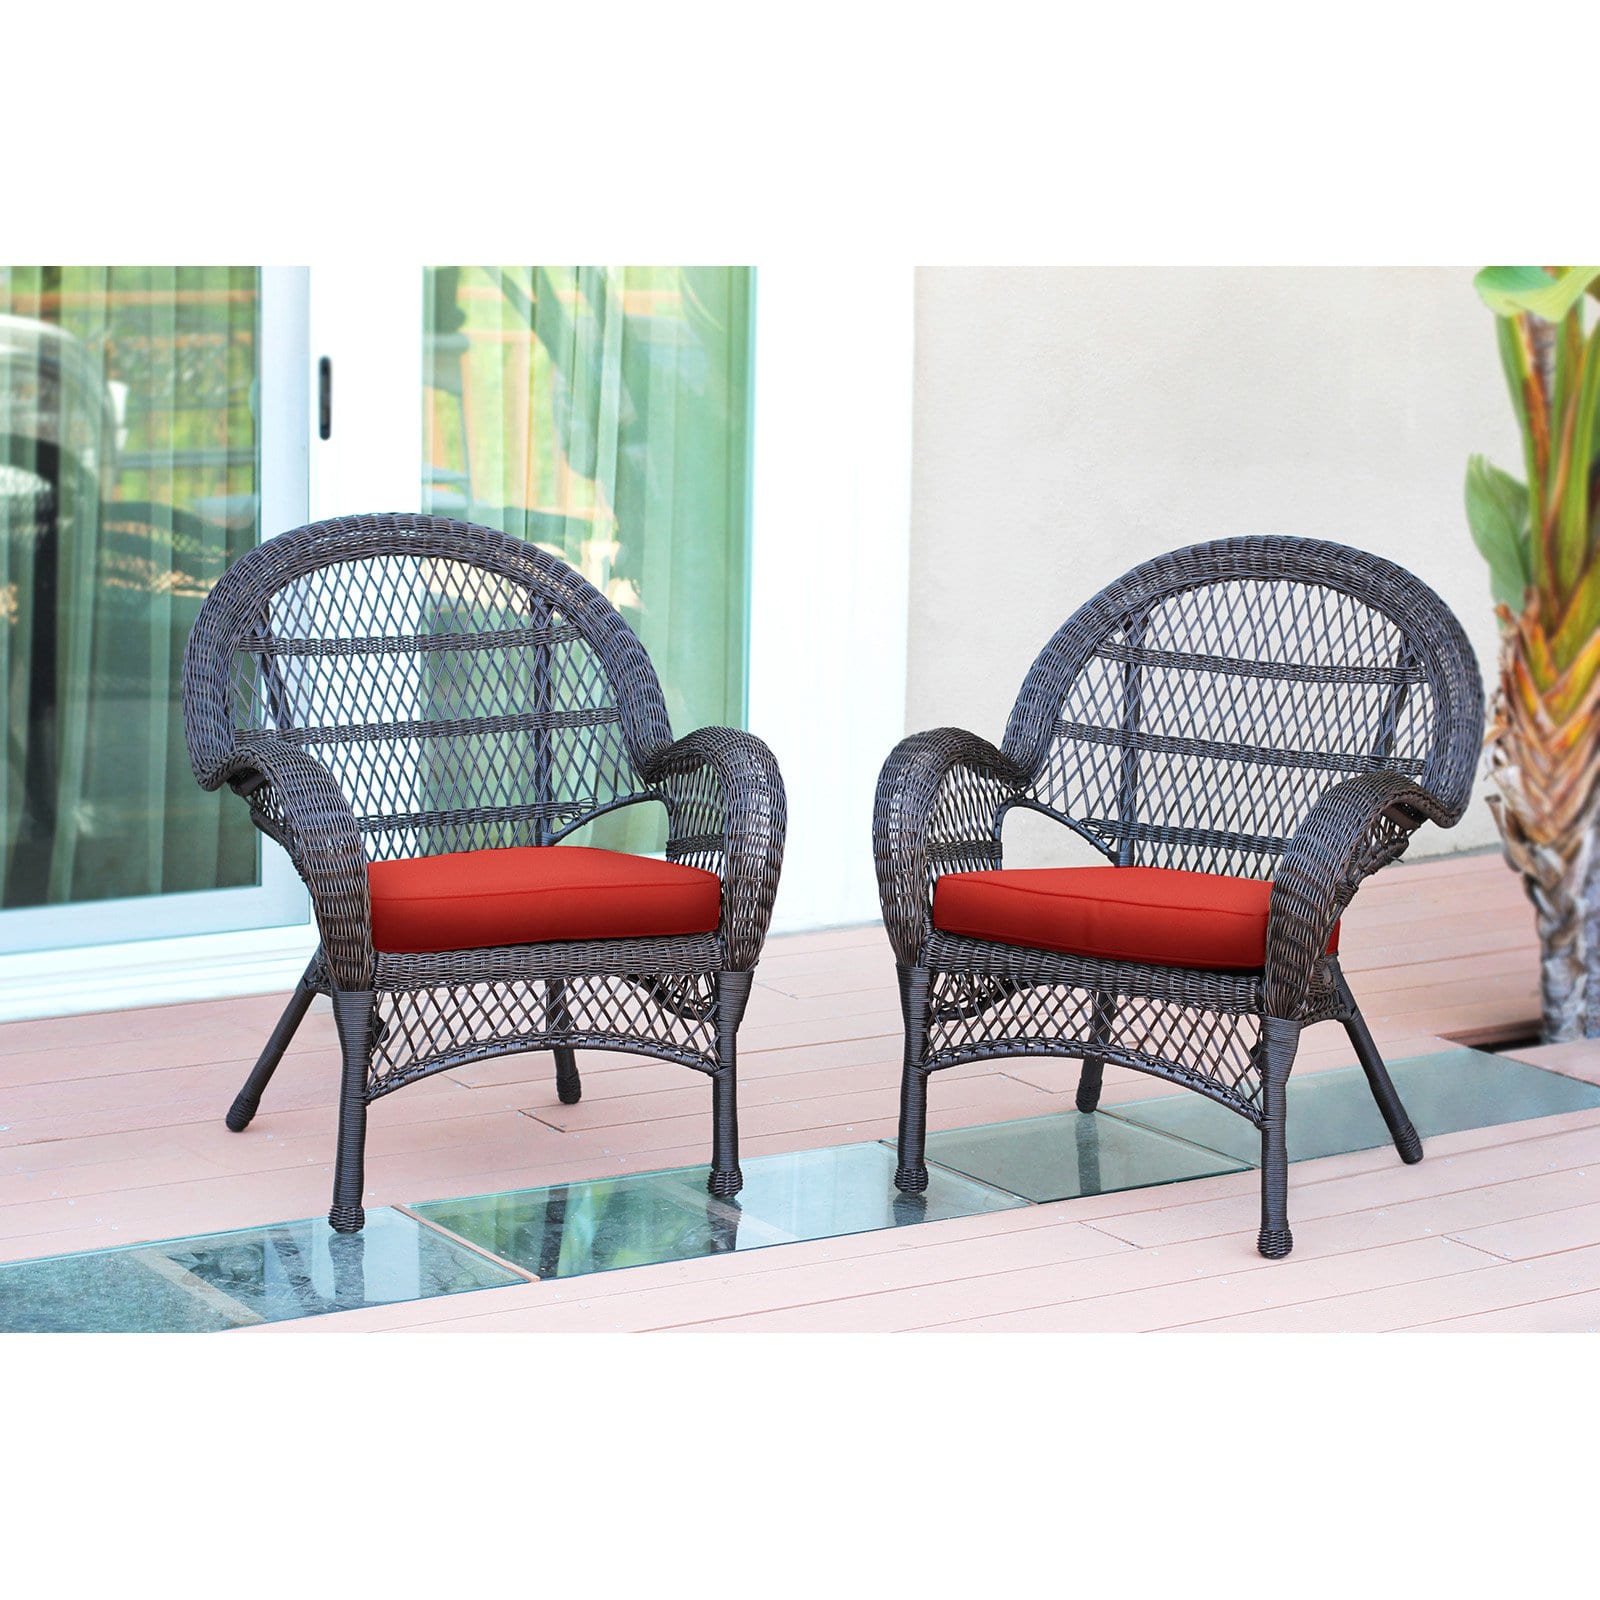 Jeco Wicker Chair in Espresso with Brown Cushion (Set of 4) - image 5 of 11